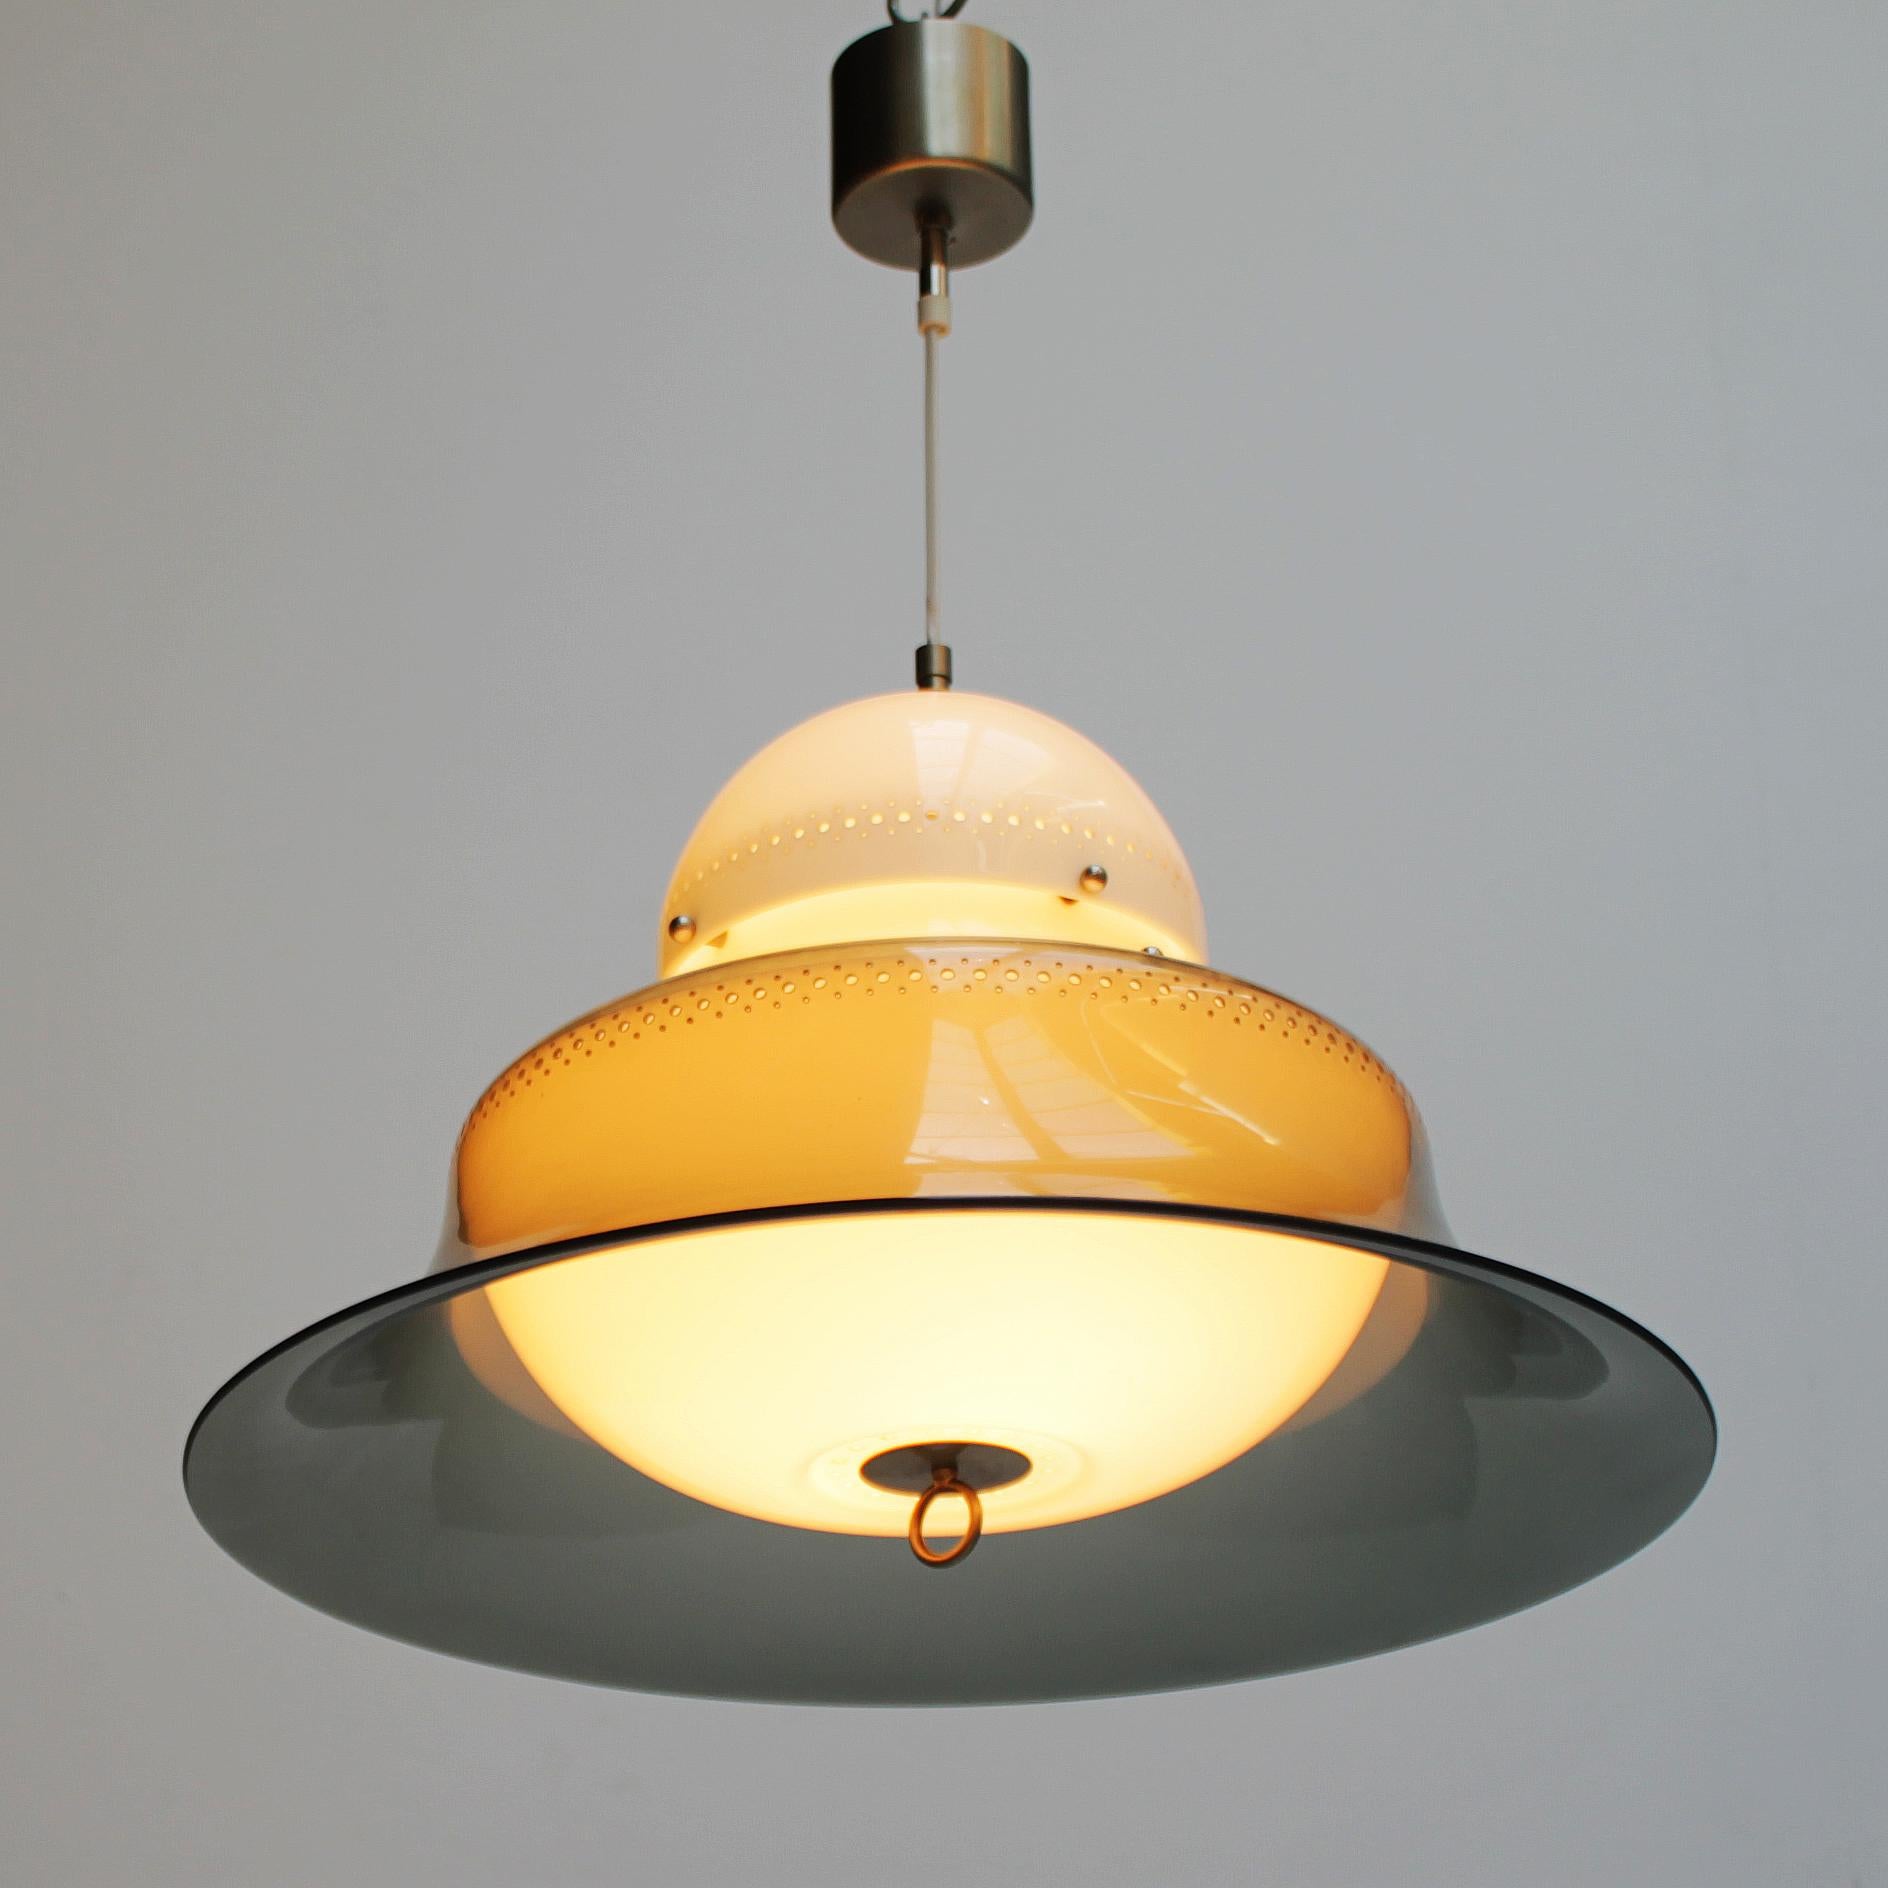 Pendant model KD14 by Sergio Asti for Kartell 1963, Italy. Plastic and nickel plated brass.
Measurements: from ceiling till drop 47.2 in. (120 cm), height light: 14.6 in. (37 cm), diameter: 20.7 inches (52,5 cm).
Three small bulbs Edison Screw